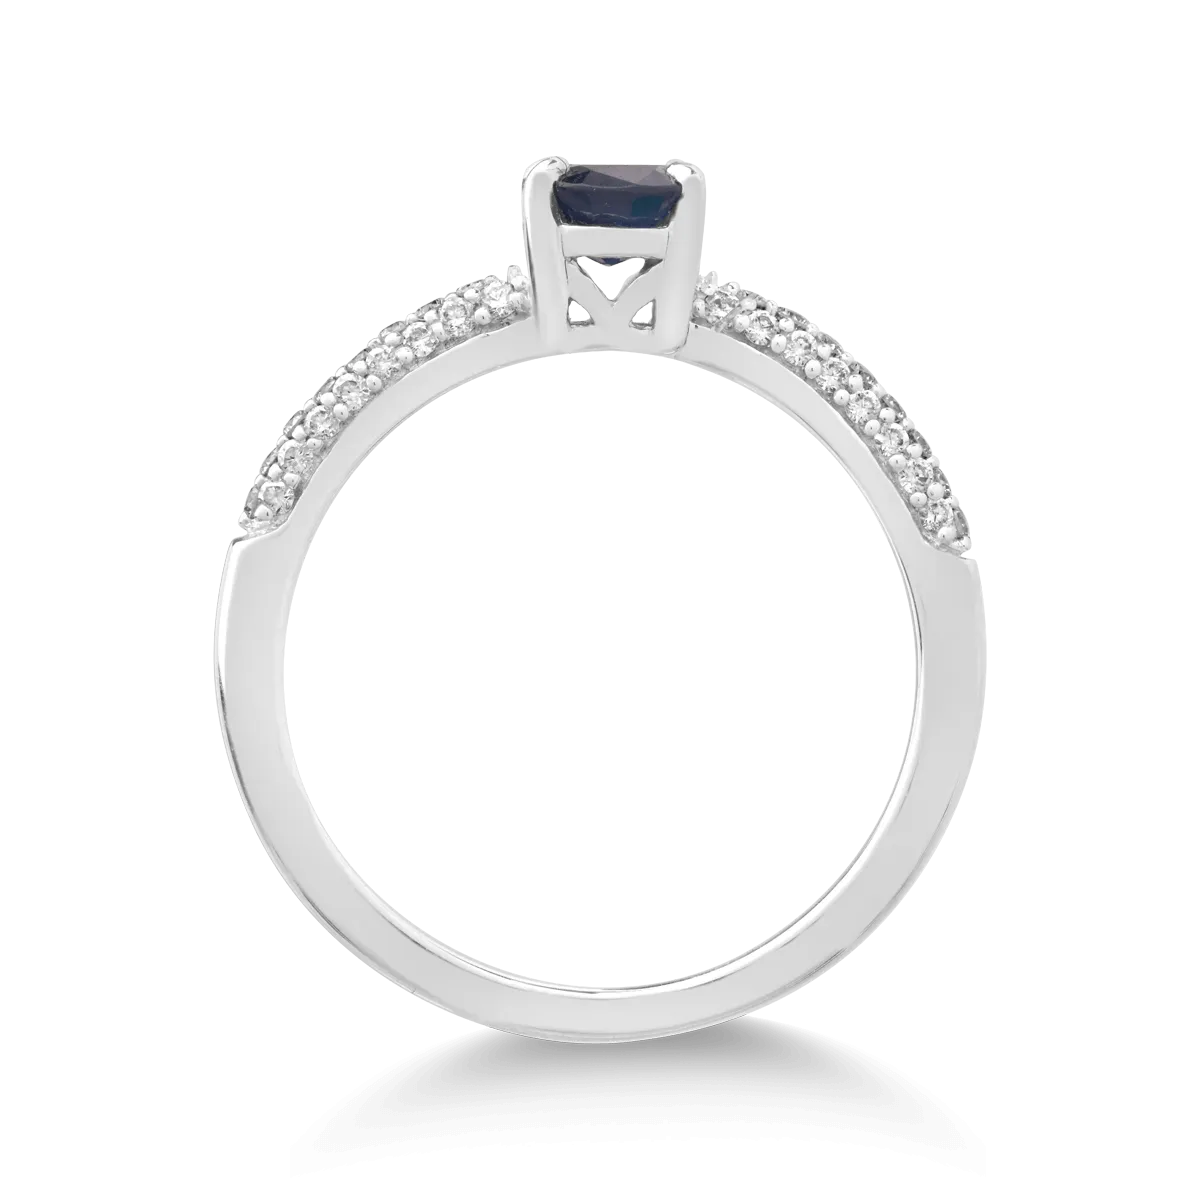 18K white gold ring with 0.917ct sapphire and 0.212ct diamonds